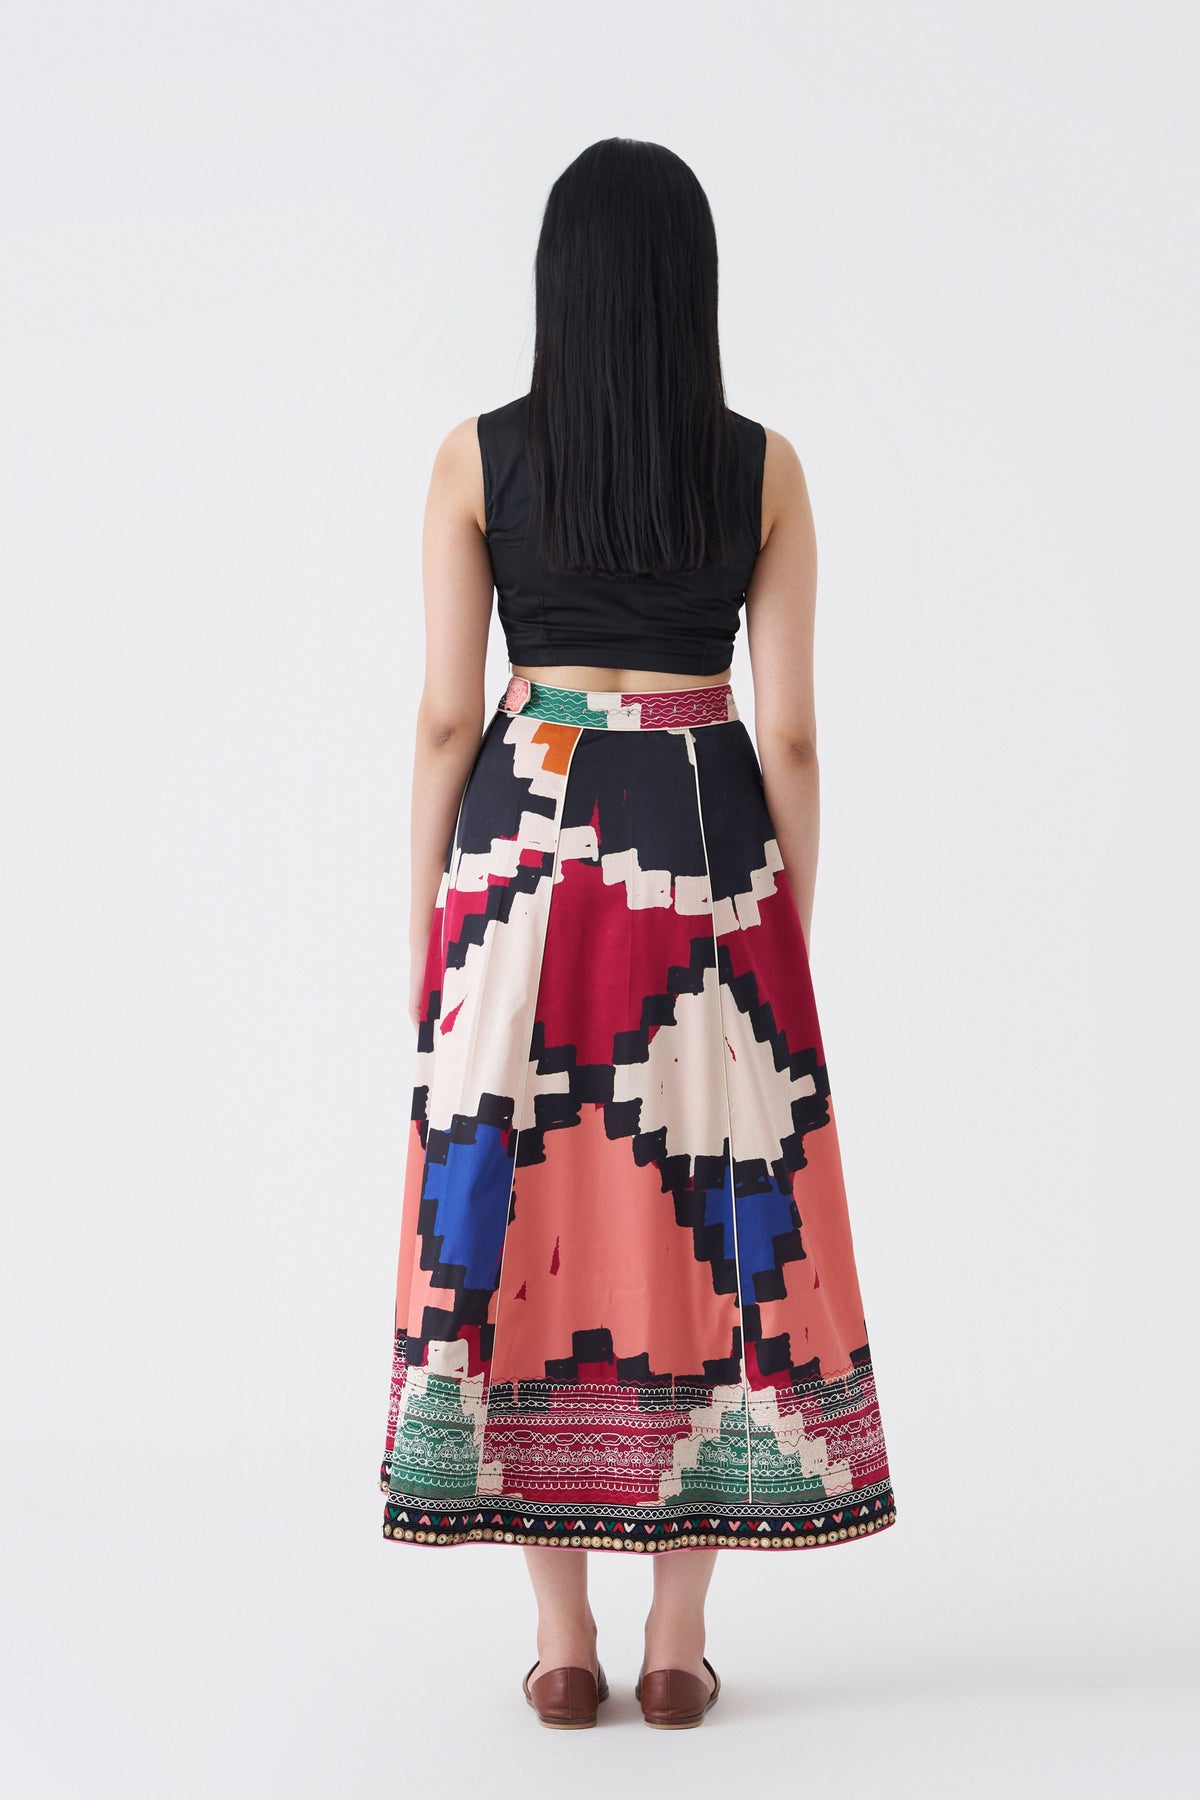 Print and Embroidered Toluca Skirt